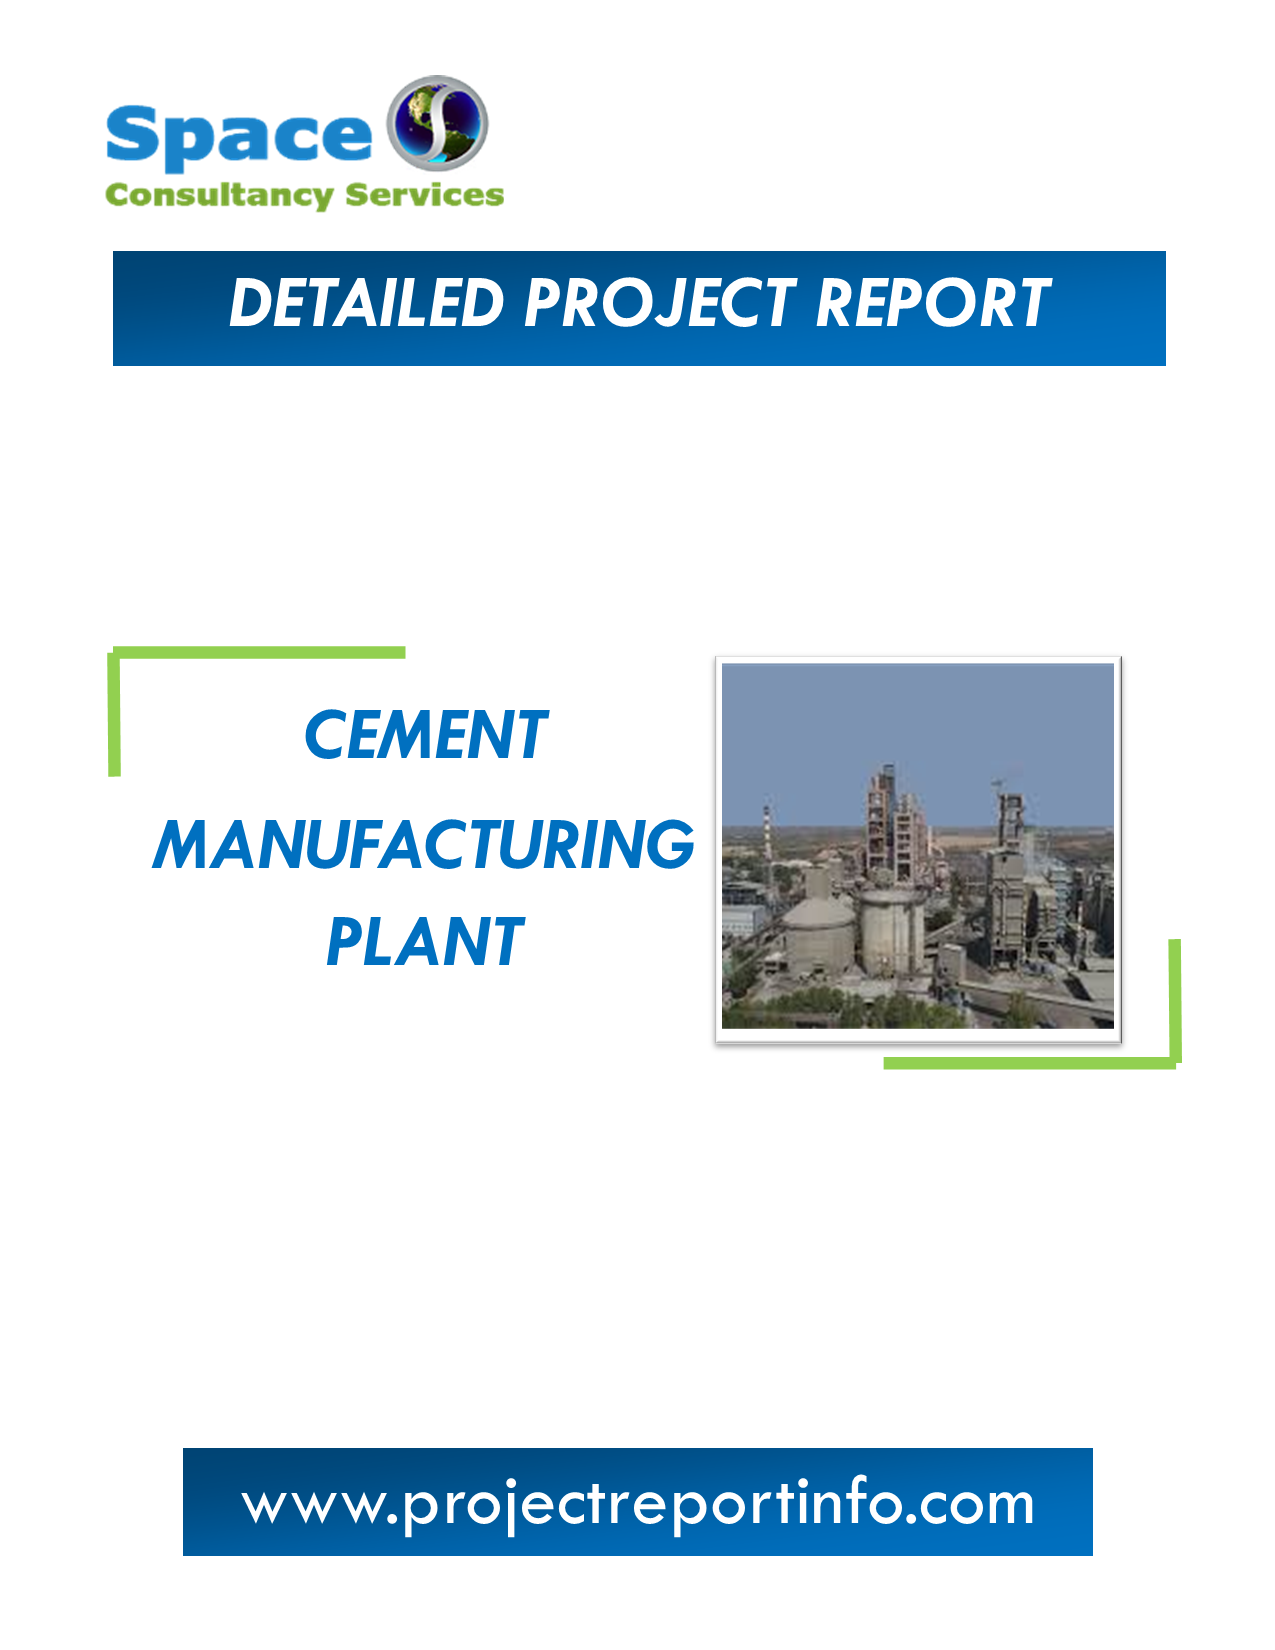 Project Report on Cement Manufacturing Plant